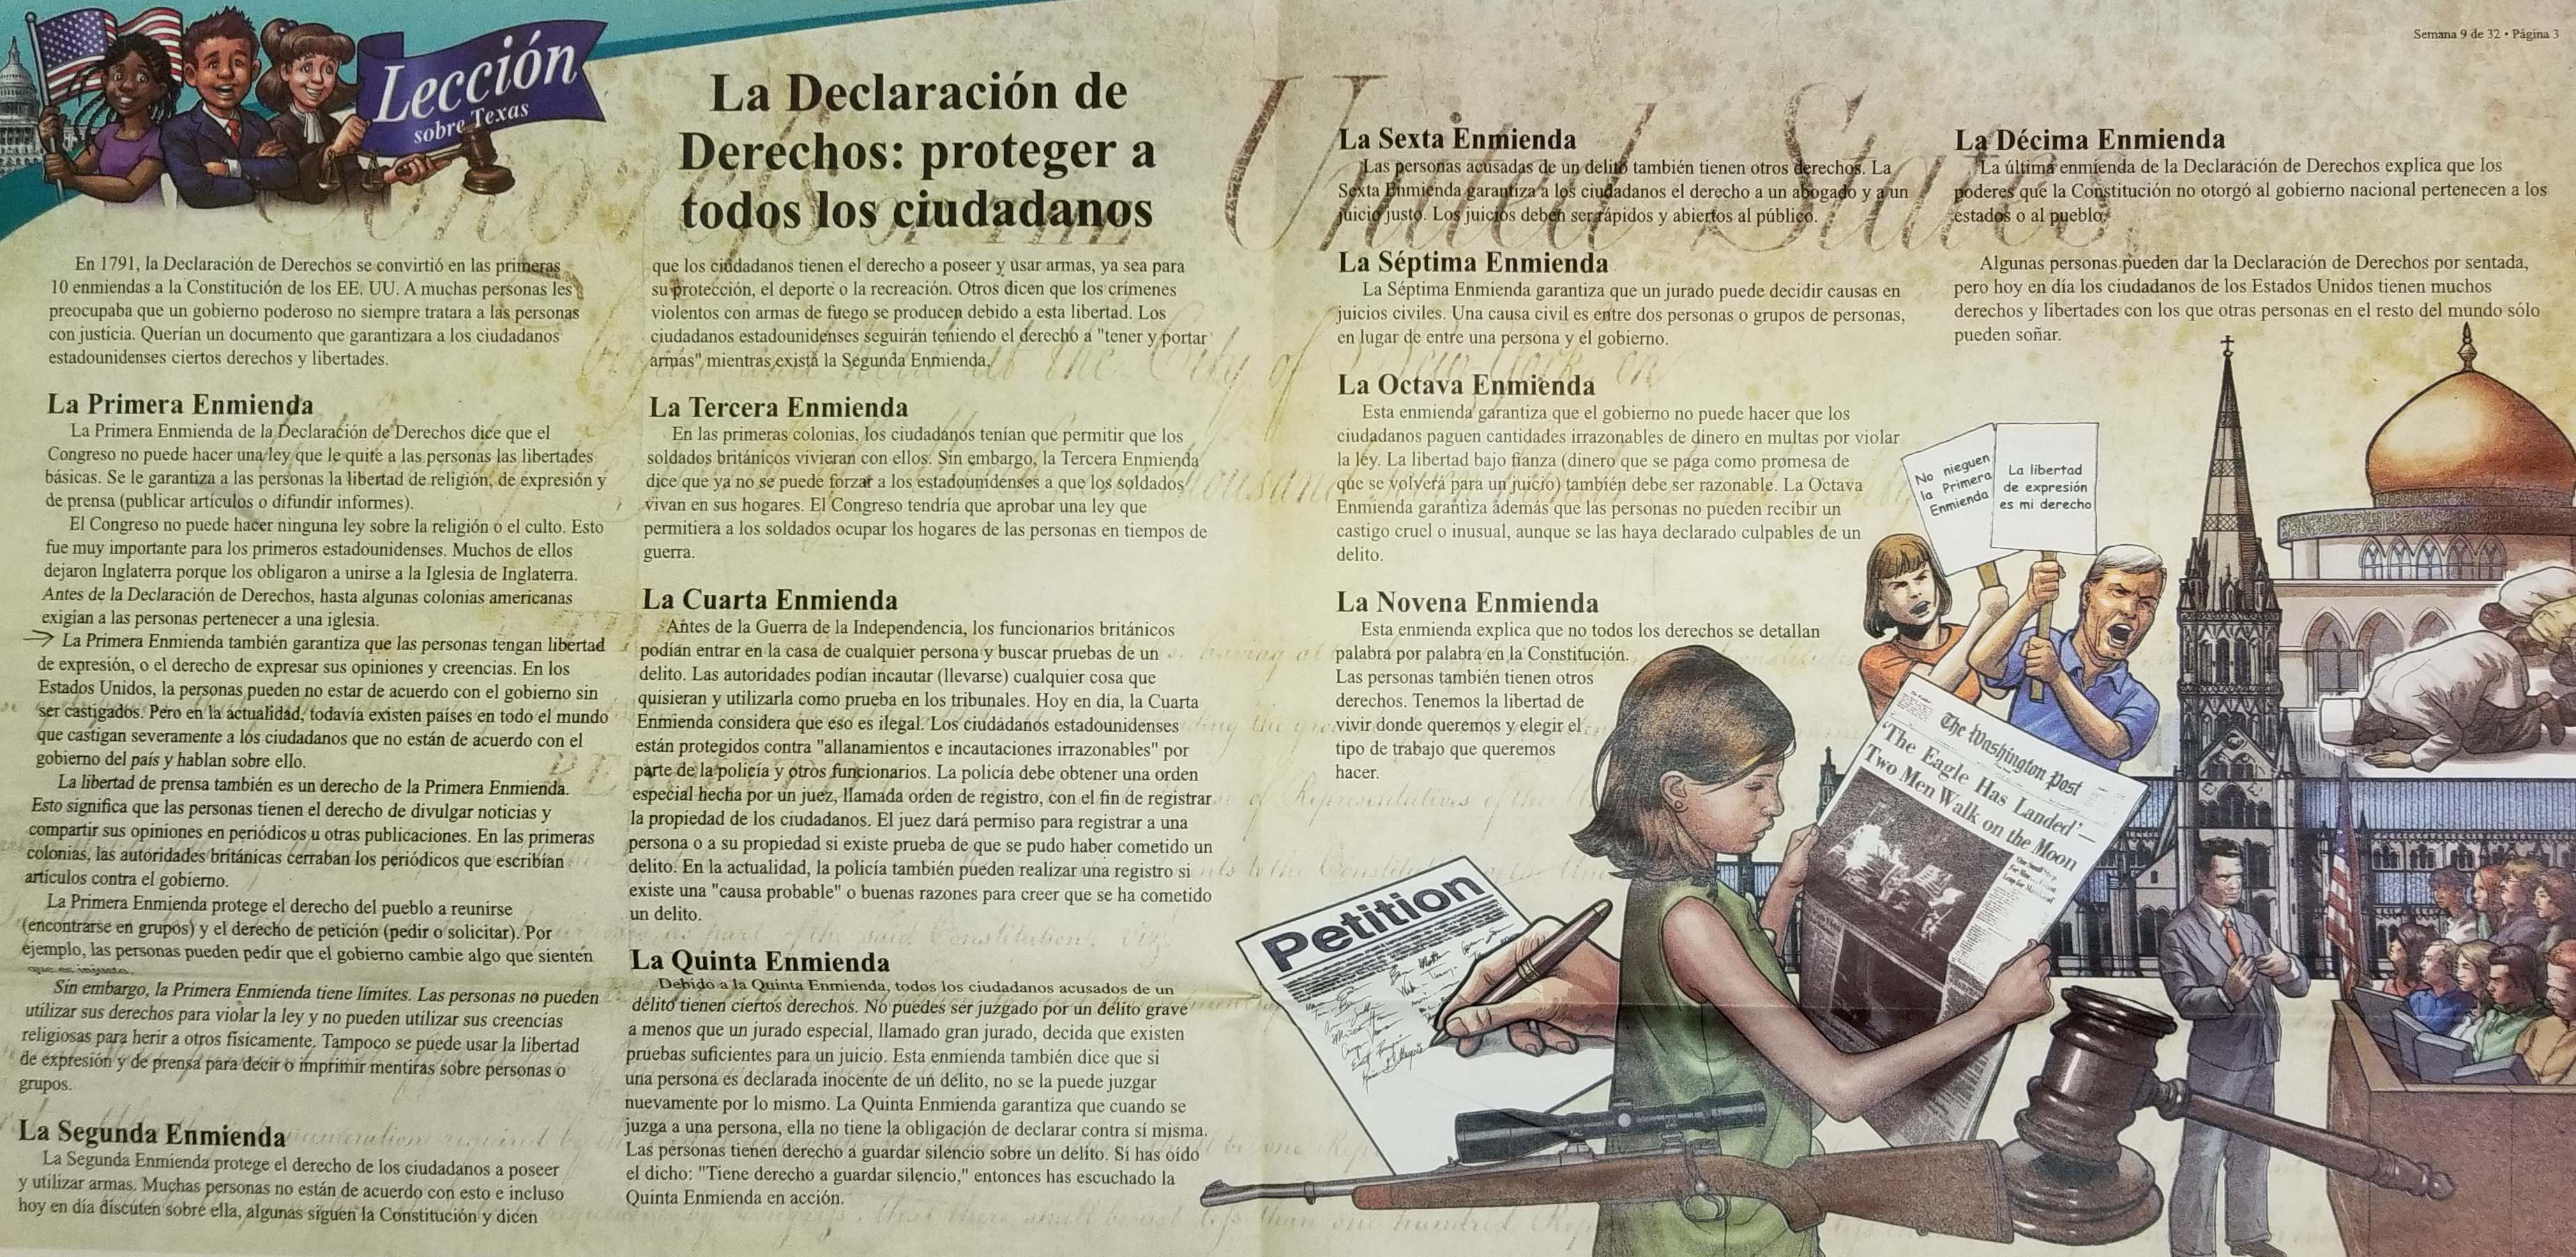 Spanish-language Weekly Reader pages discussing the Bill of Rights